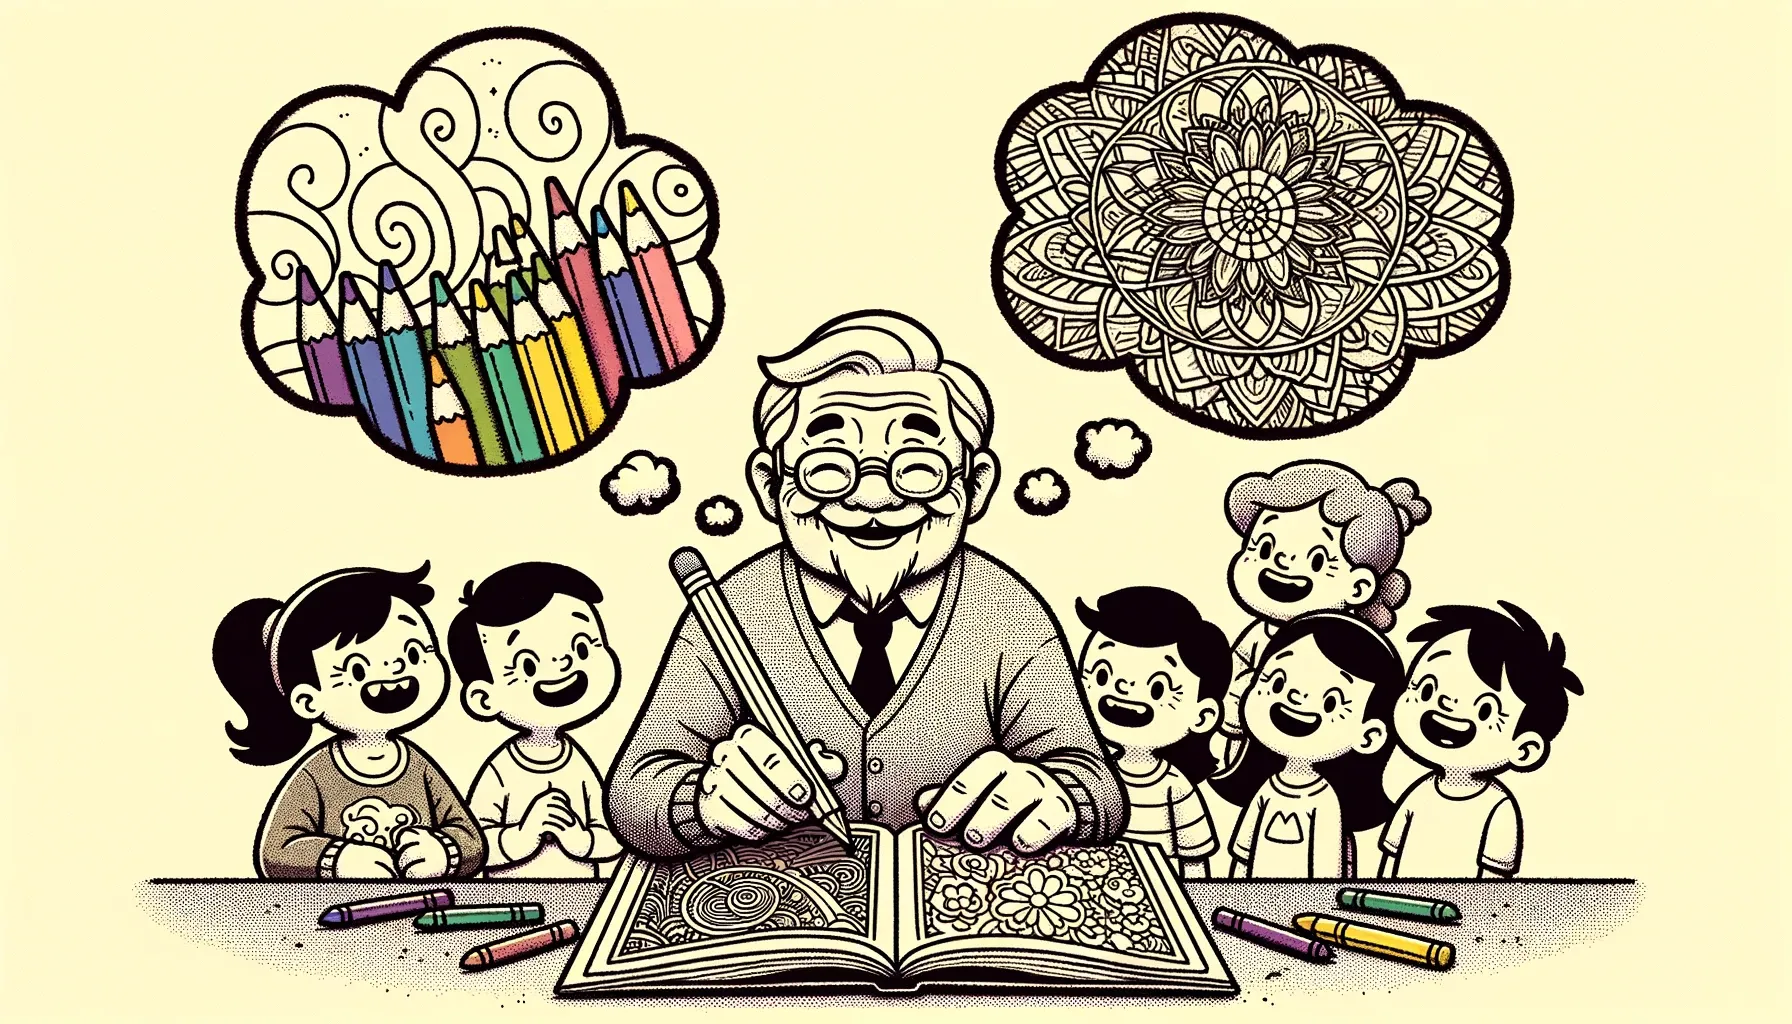 Wide doodle illustration: A jovial adult, seated amidst a group of children, coloring a complex design in an adult coloring book. The children watch in awe, while the adult grins cheekily. Floating thought bubbles show the adult reminiscing about choosing crayons as a child, contrasting with the present moment where they're picking colored pencils.